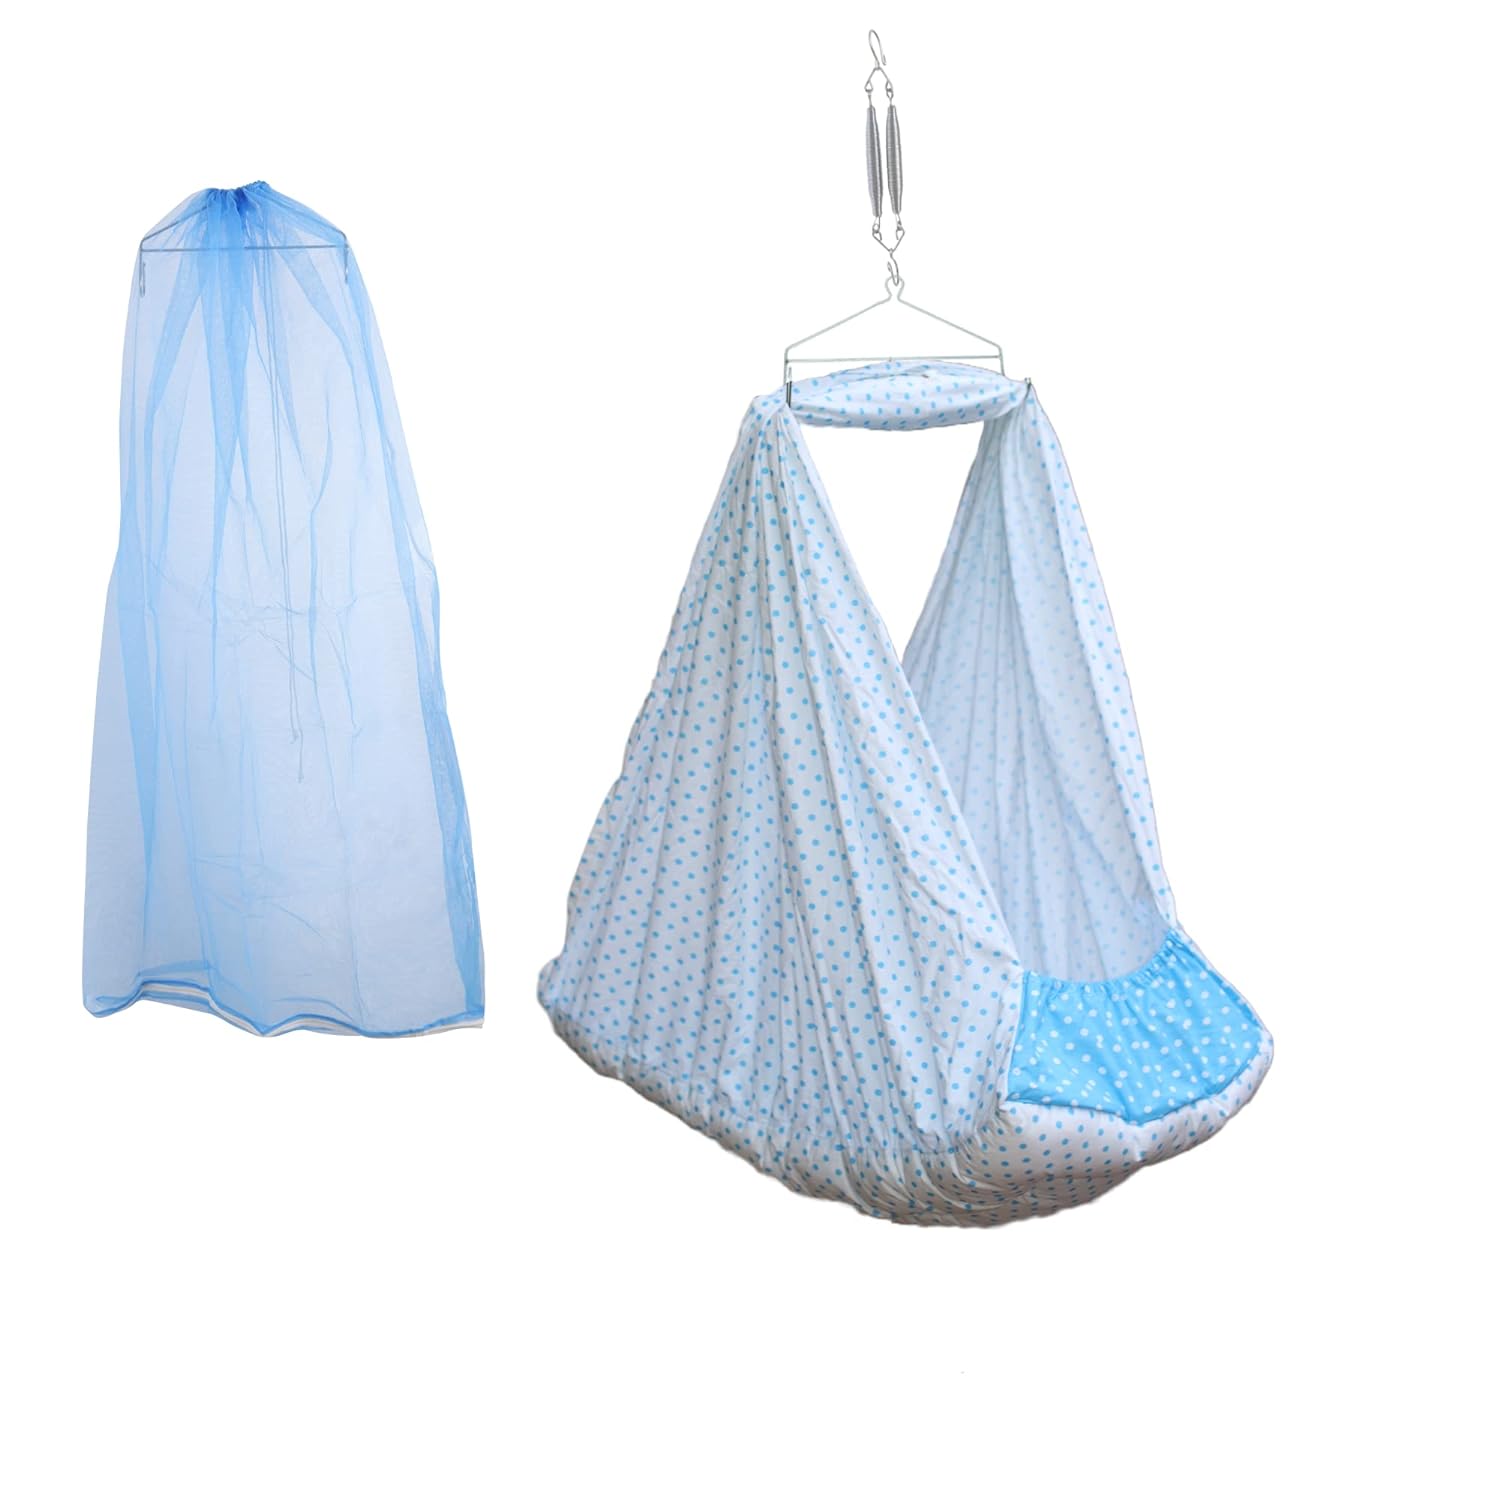 Cradle Factory Twill Star Net Cradle Cloth With Net